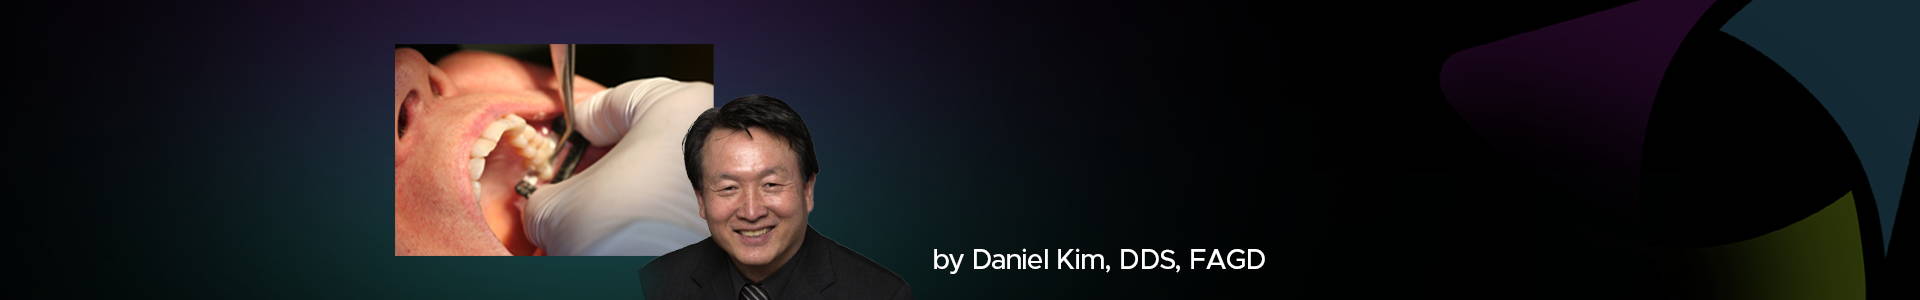 blog banner featuring Dr Daniel Kim and a clinical image in the back